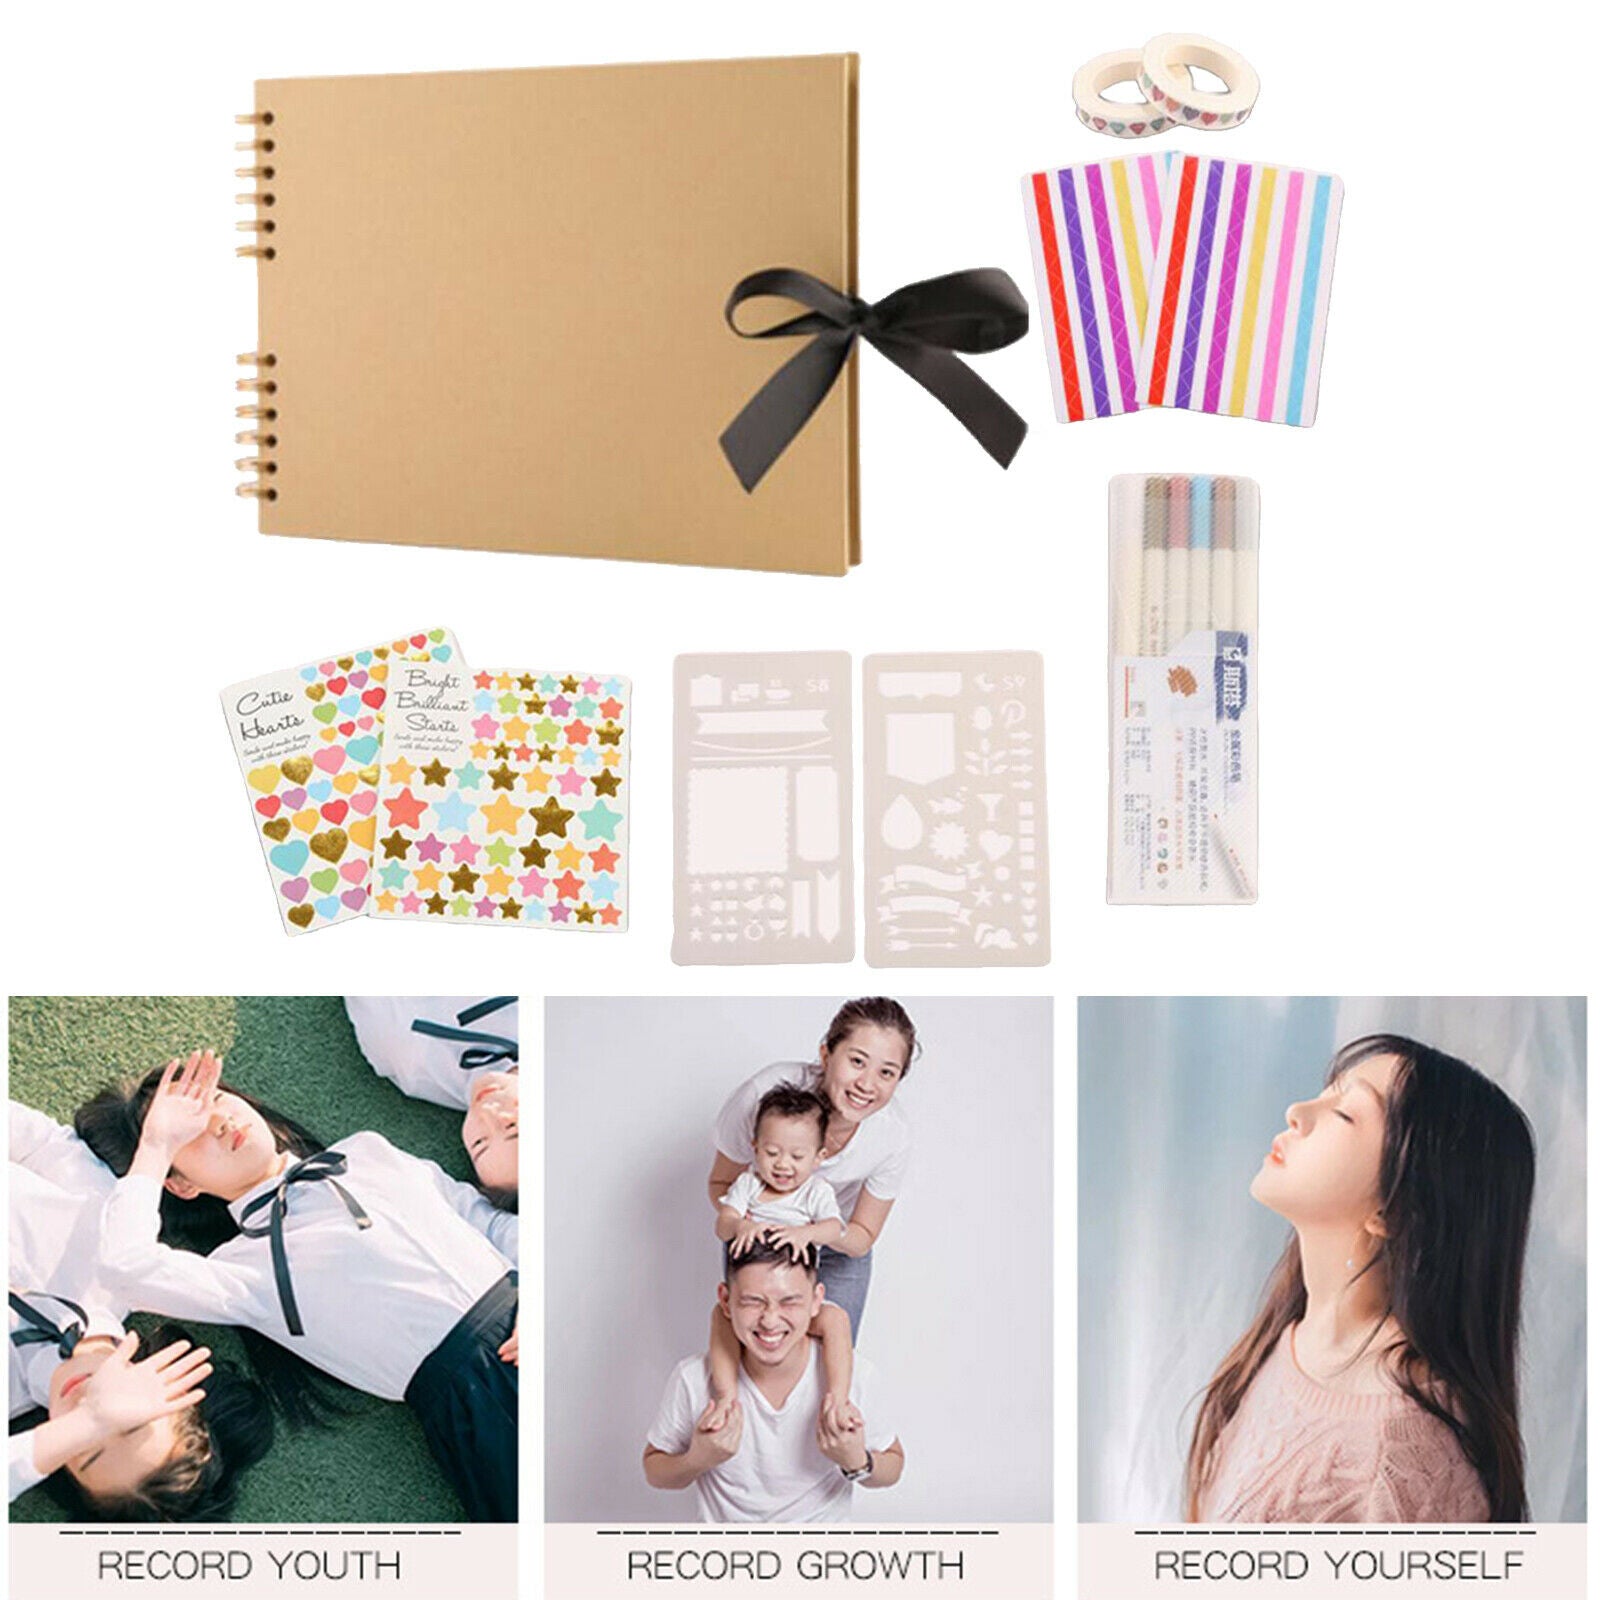 40 Black Pages Photo Album DIY Kit Guest Book Anniversary Gifts Champagne